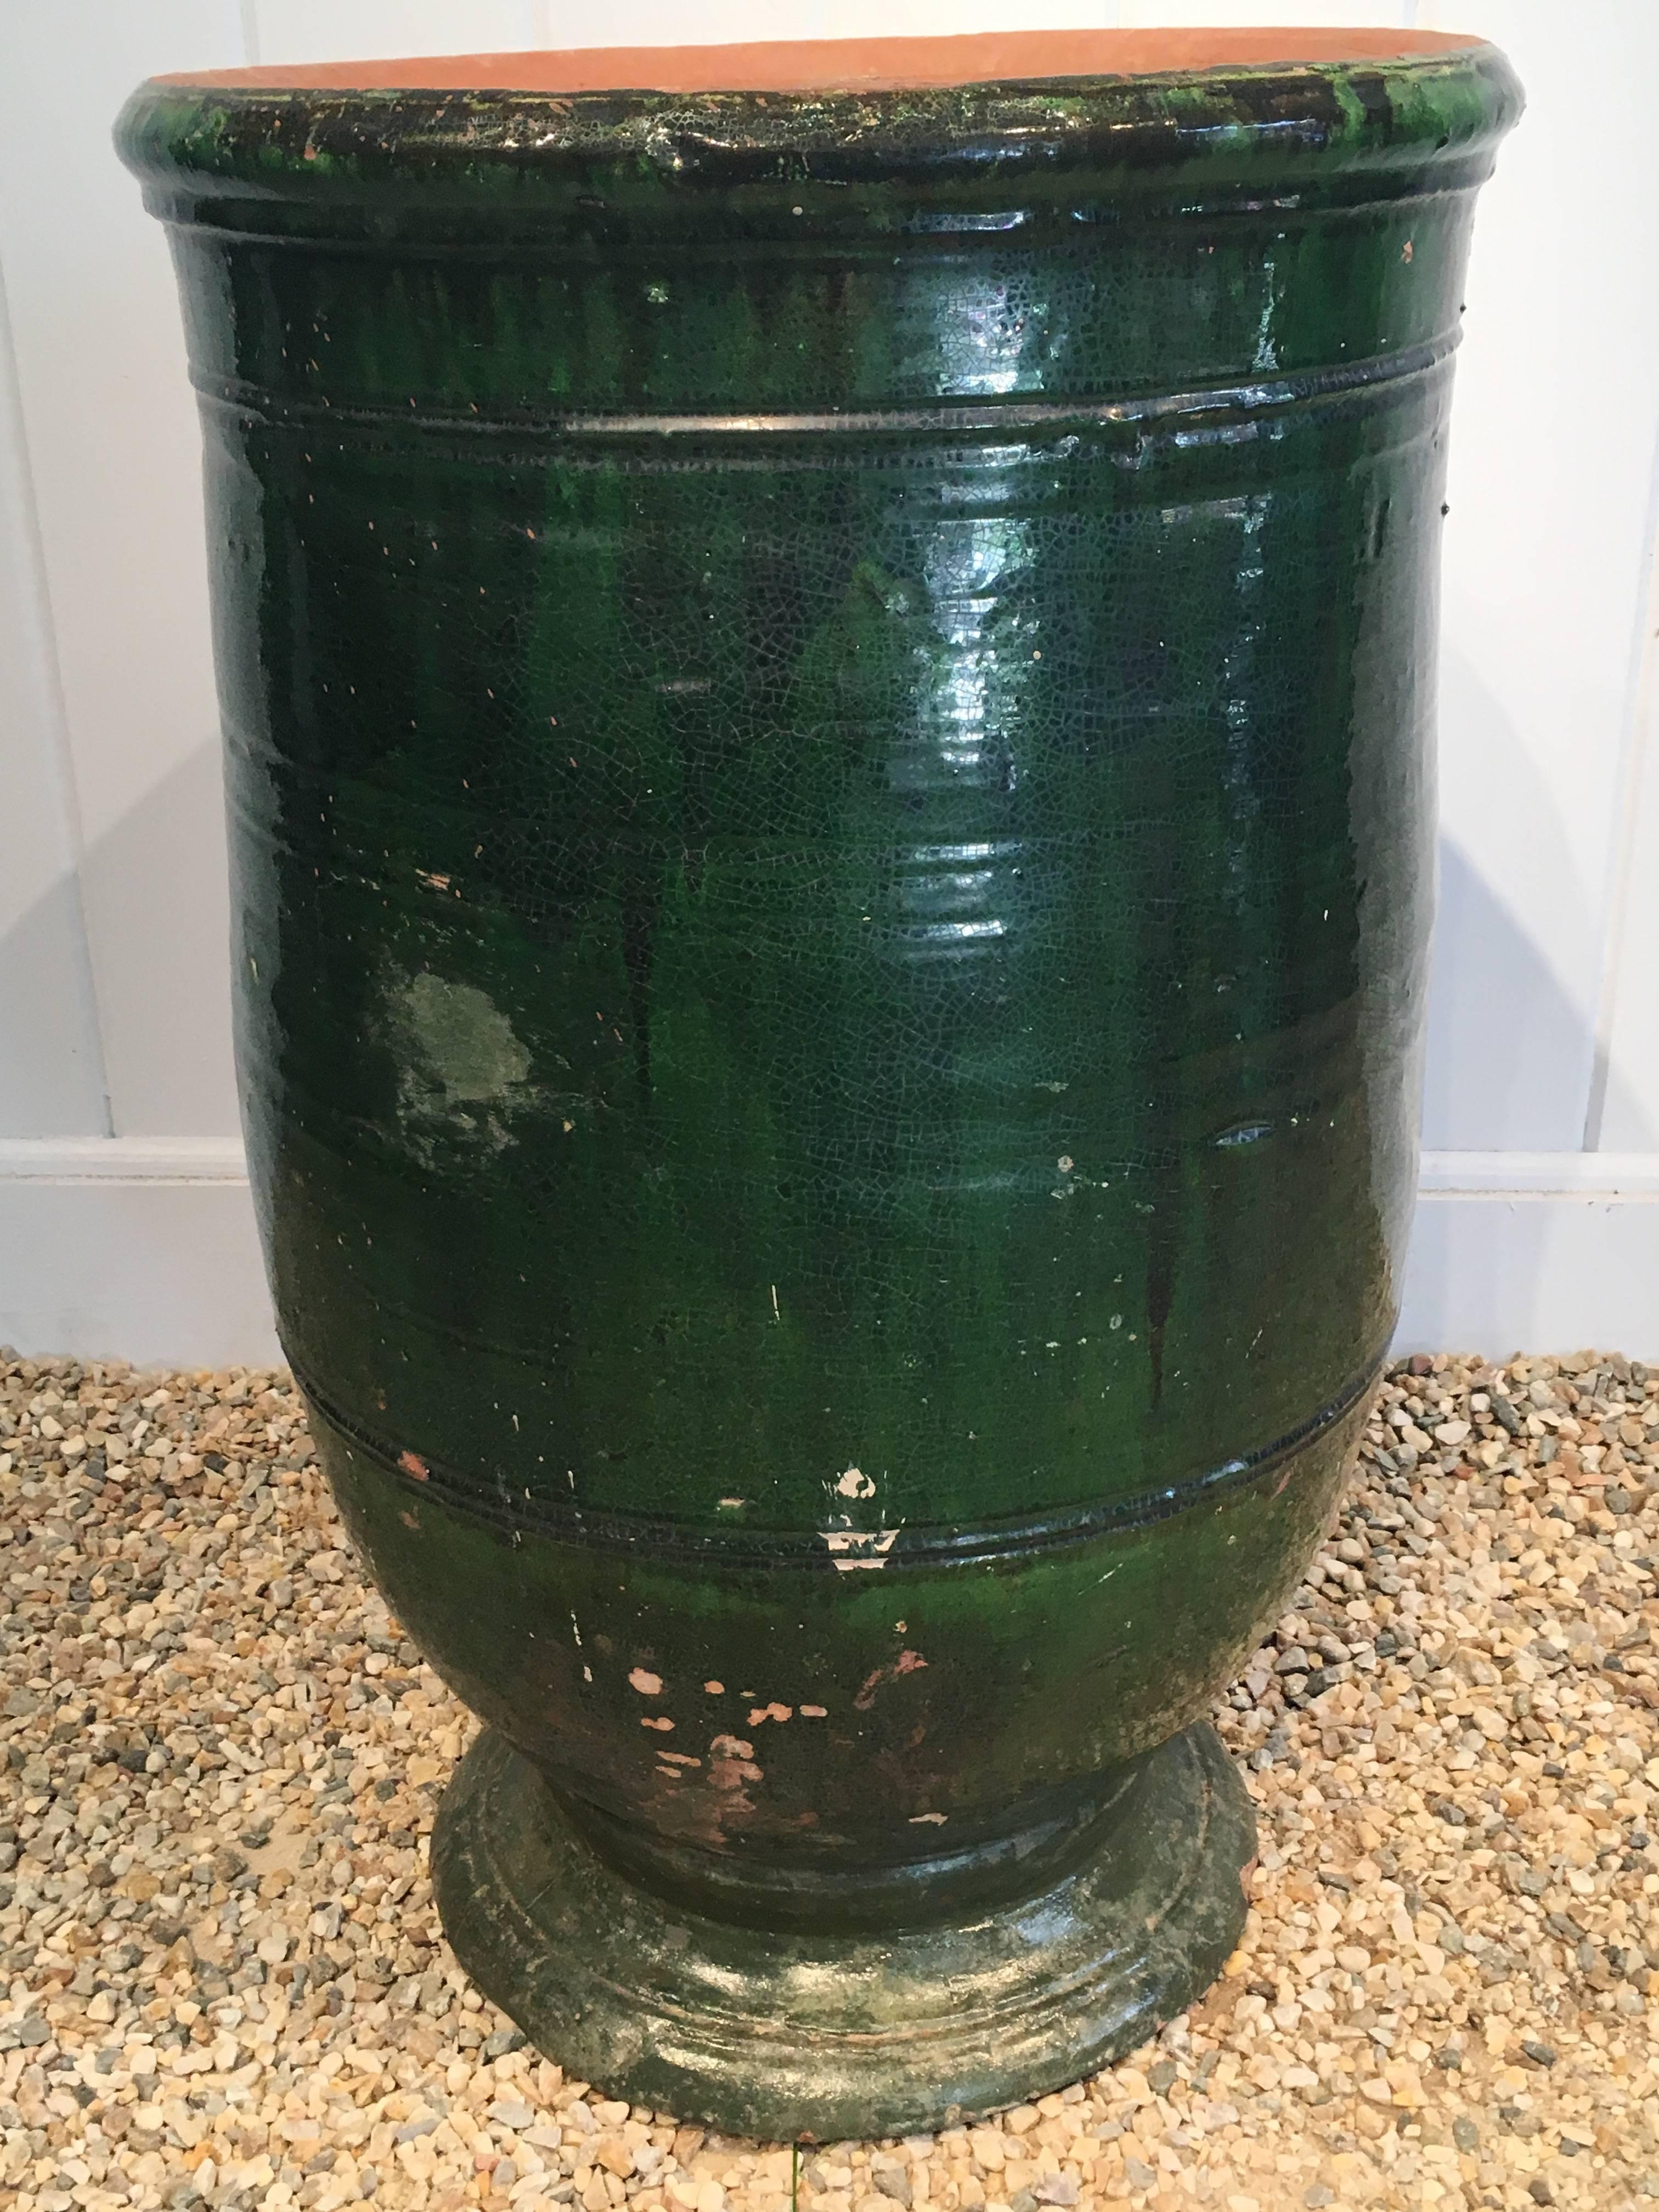 This beauty comes from Apt in the Provence region of France and has the most stunning dark emerald green colored glaze. In marvelous condition, it has a small chip to the foot (shown in photo #9) and a small repair to the foot. Because it is glazed